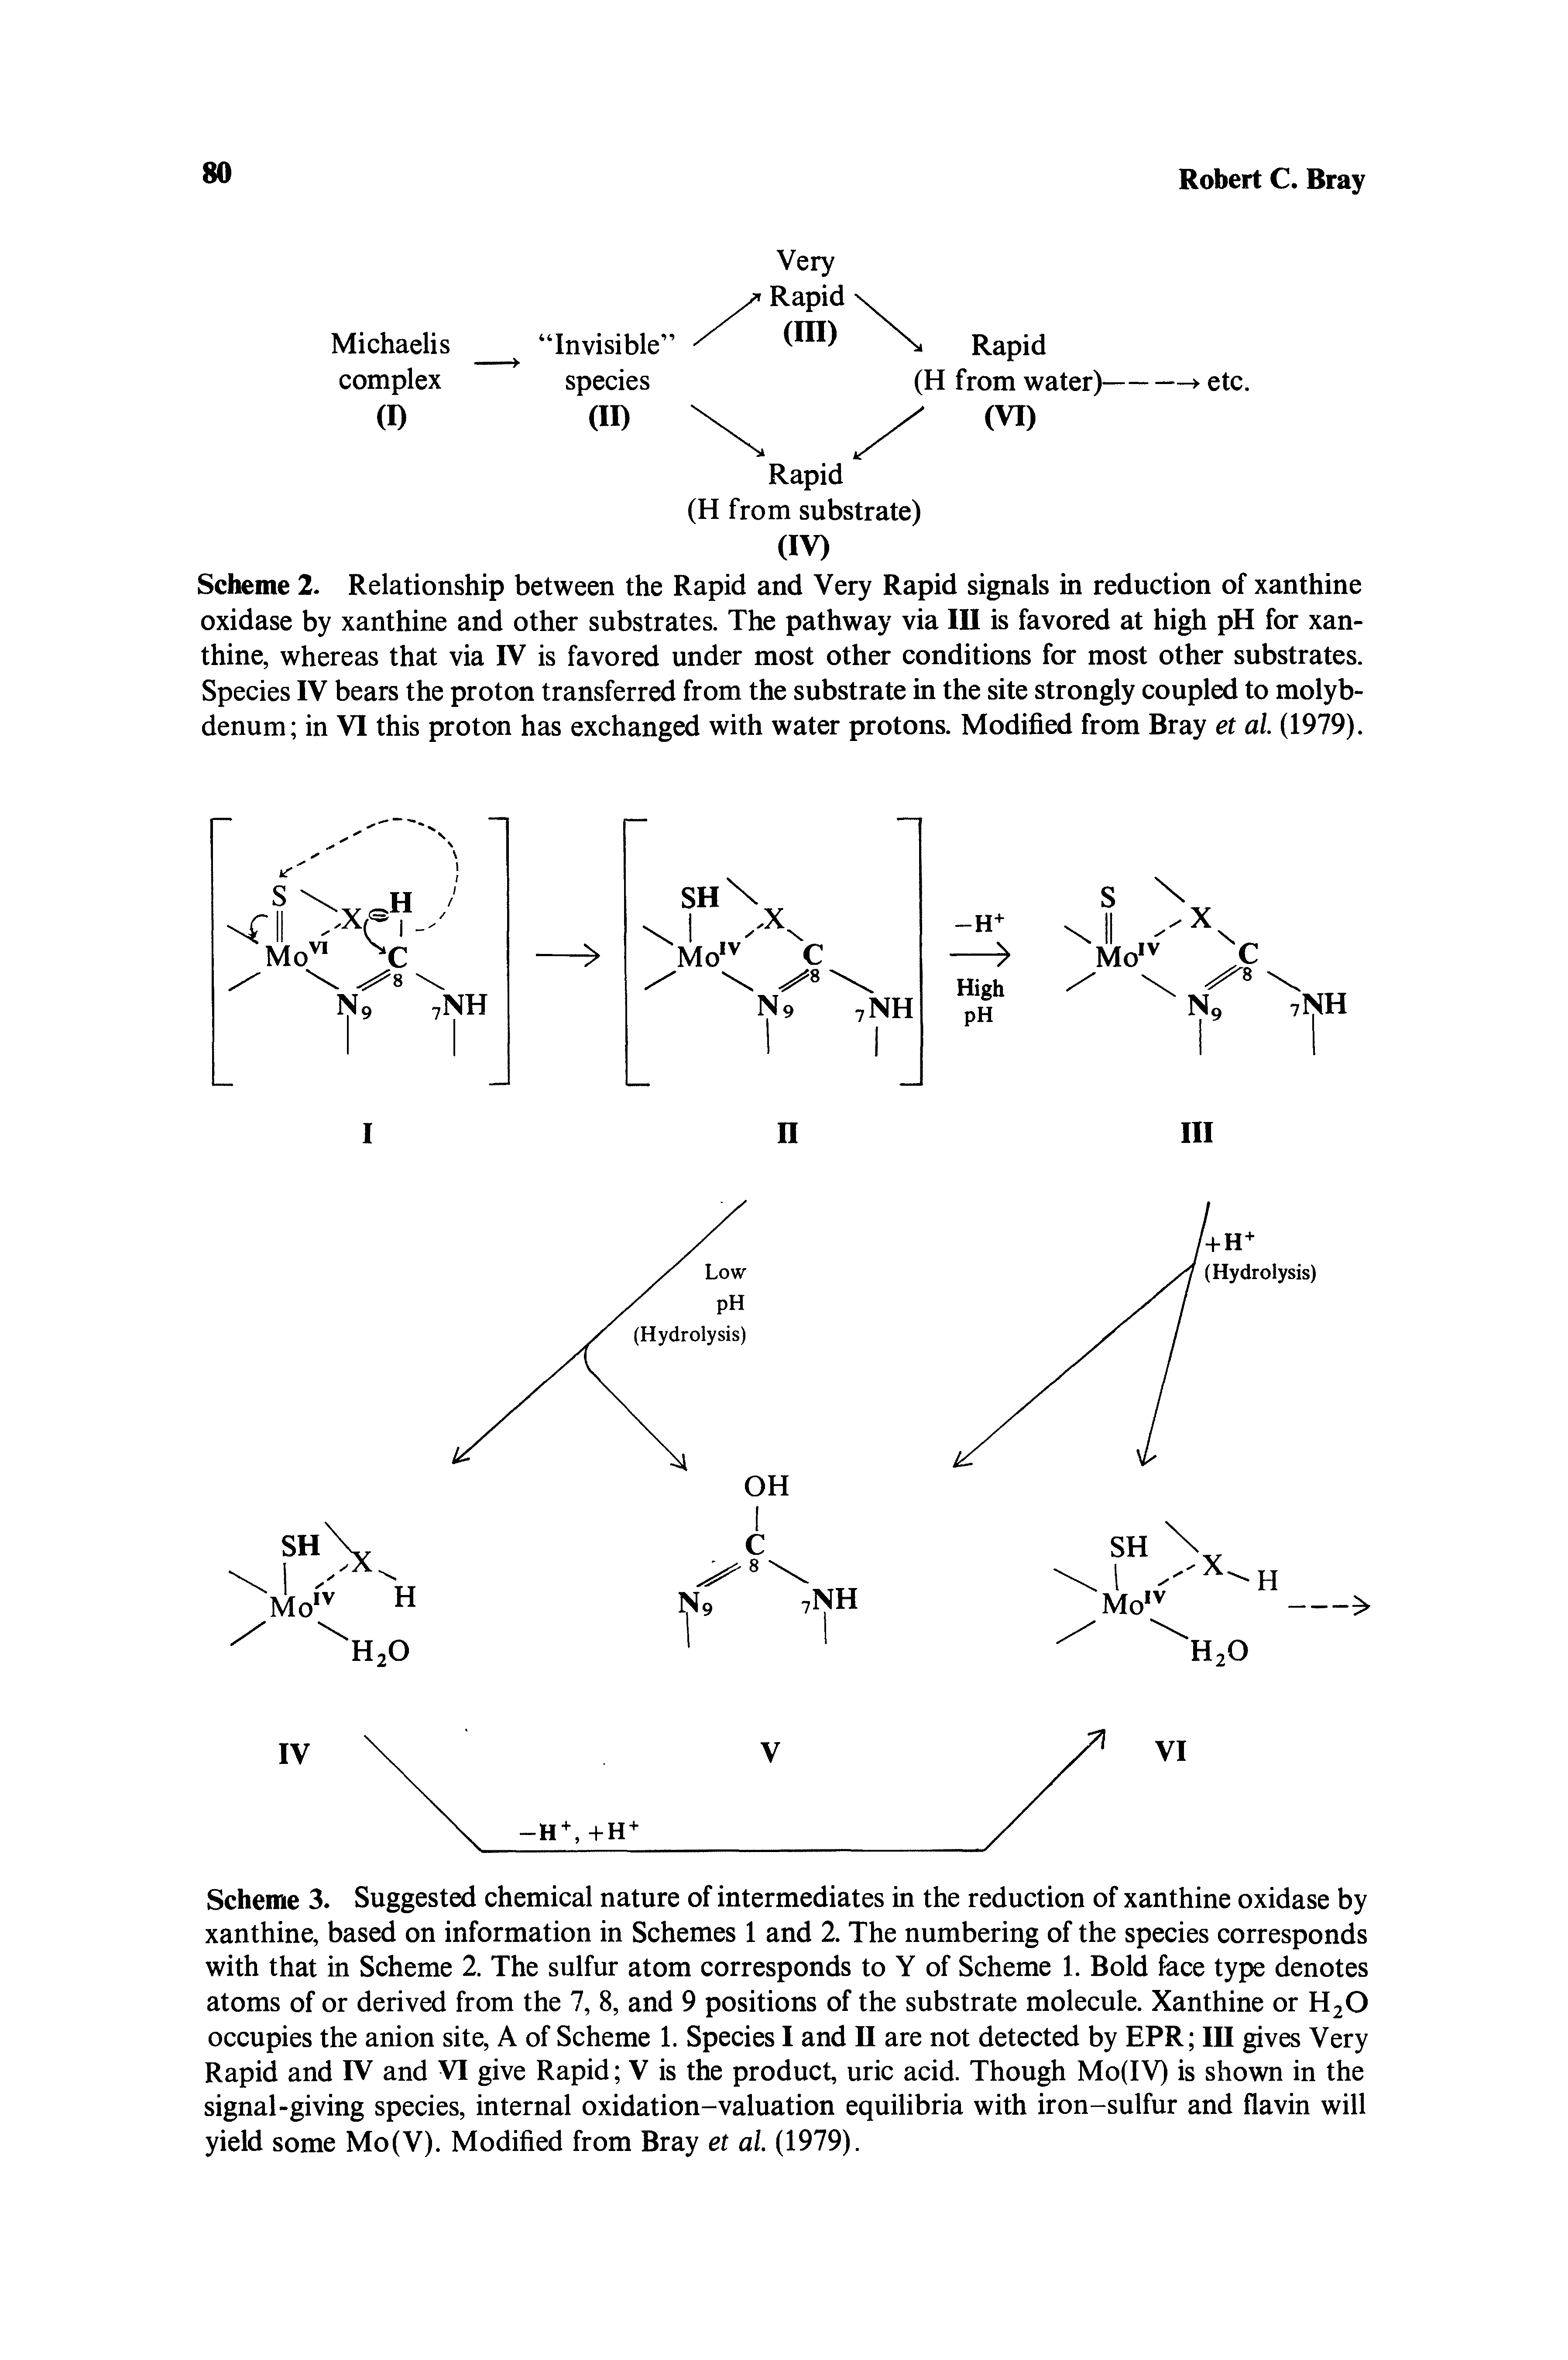 Scheme 3. Suggested chemical nature of intermediates in the reduction of xanthine oxidase by xanthine, based on information in Schemes 1 and 2. The numbering of the species corresponds with that in Scheme 2. The sulfur atom corresponds to Y of Scheme 1. Bold face type denotes atoms of or derived from the 7, 8, and 9 positions of the substrate molecule. Xanthine or H2O occupies the anion site, A of Scheme 1. Species I and II are not detected by EPR III gives Very Rapid and IV and VI give Rapid V is the product, uric acid. Though Mo(IV) is shown in the signal-giving species, internal oxidation-valuation equilibria with iron-sulfur and flavin will yield some Mo(V). Modified from Bray et al. (1979).